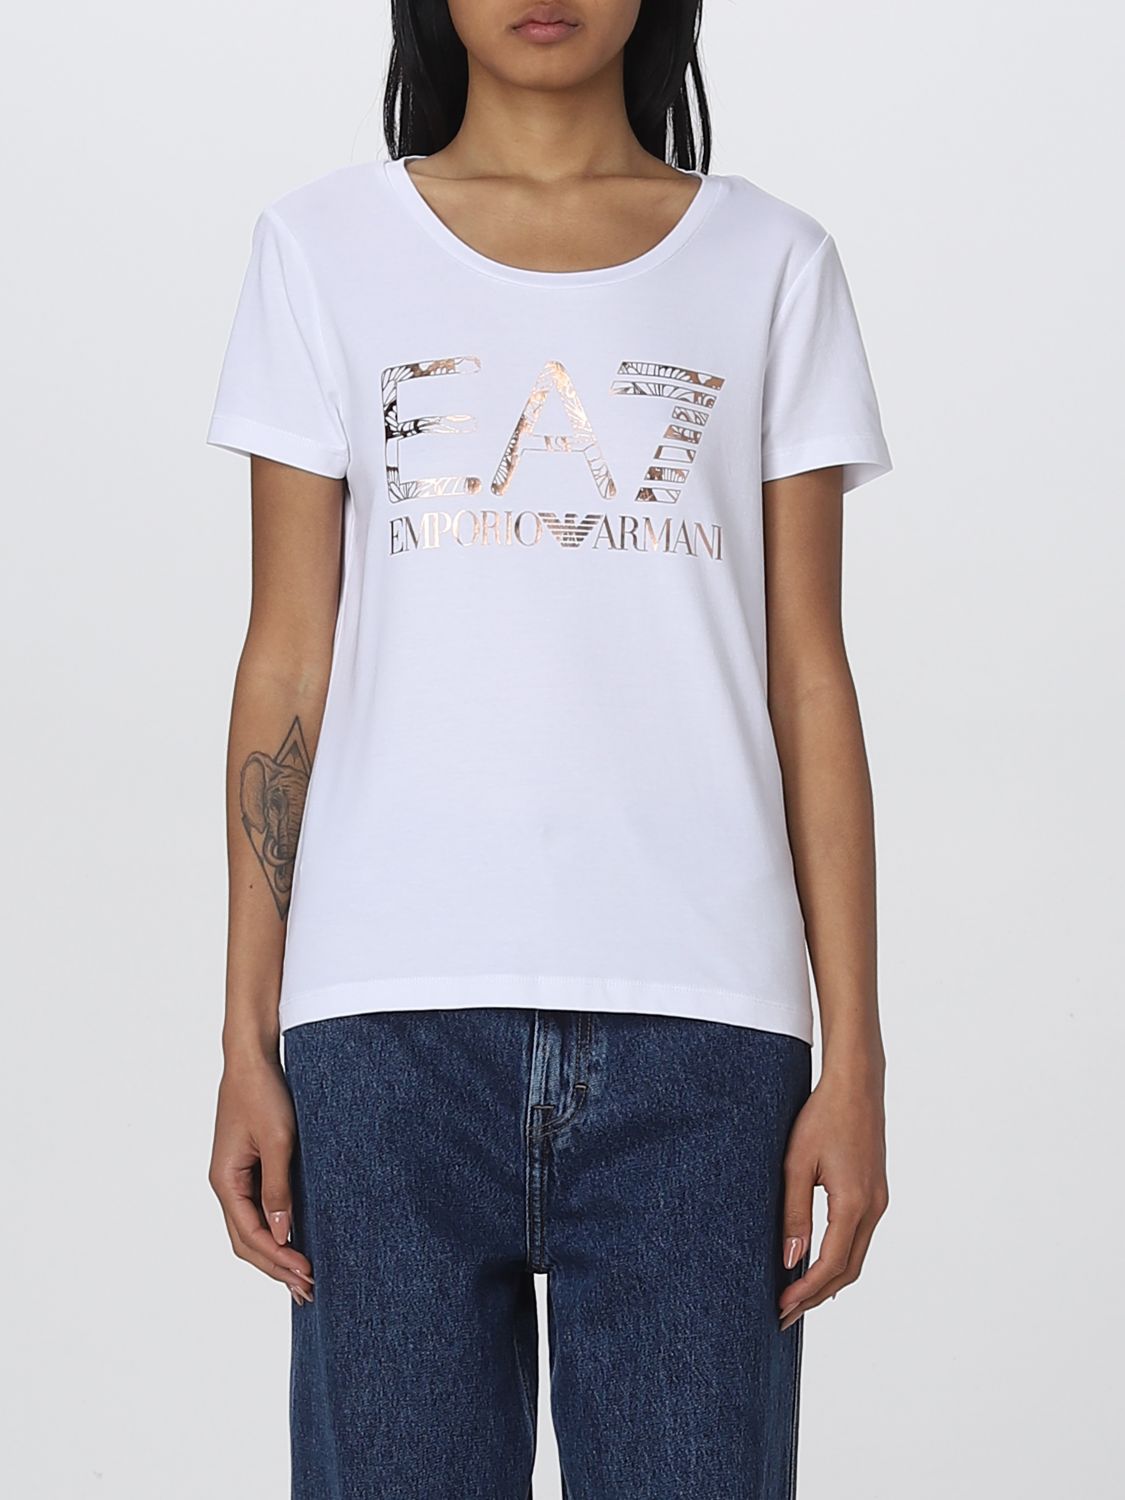 Ea7 T-shirt With Logo In White